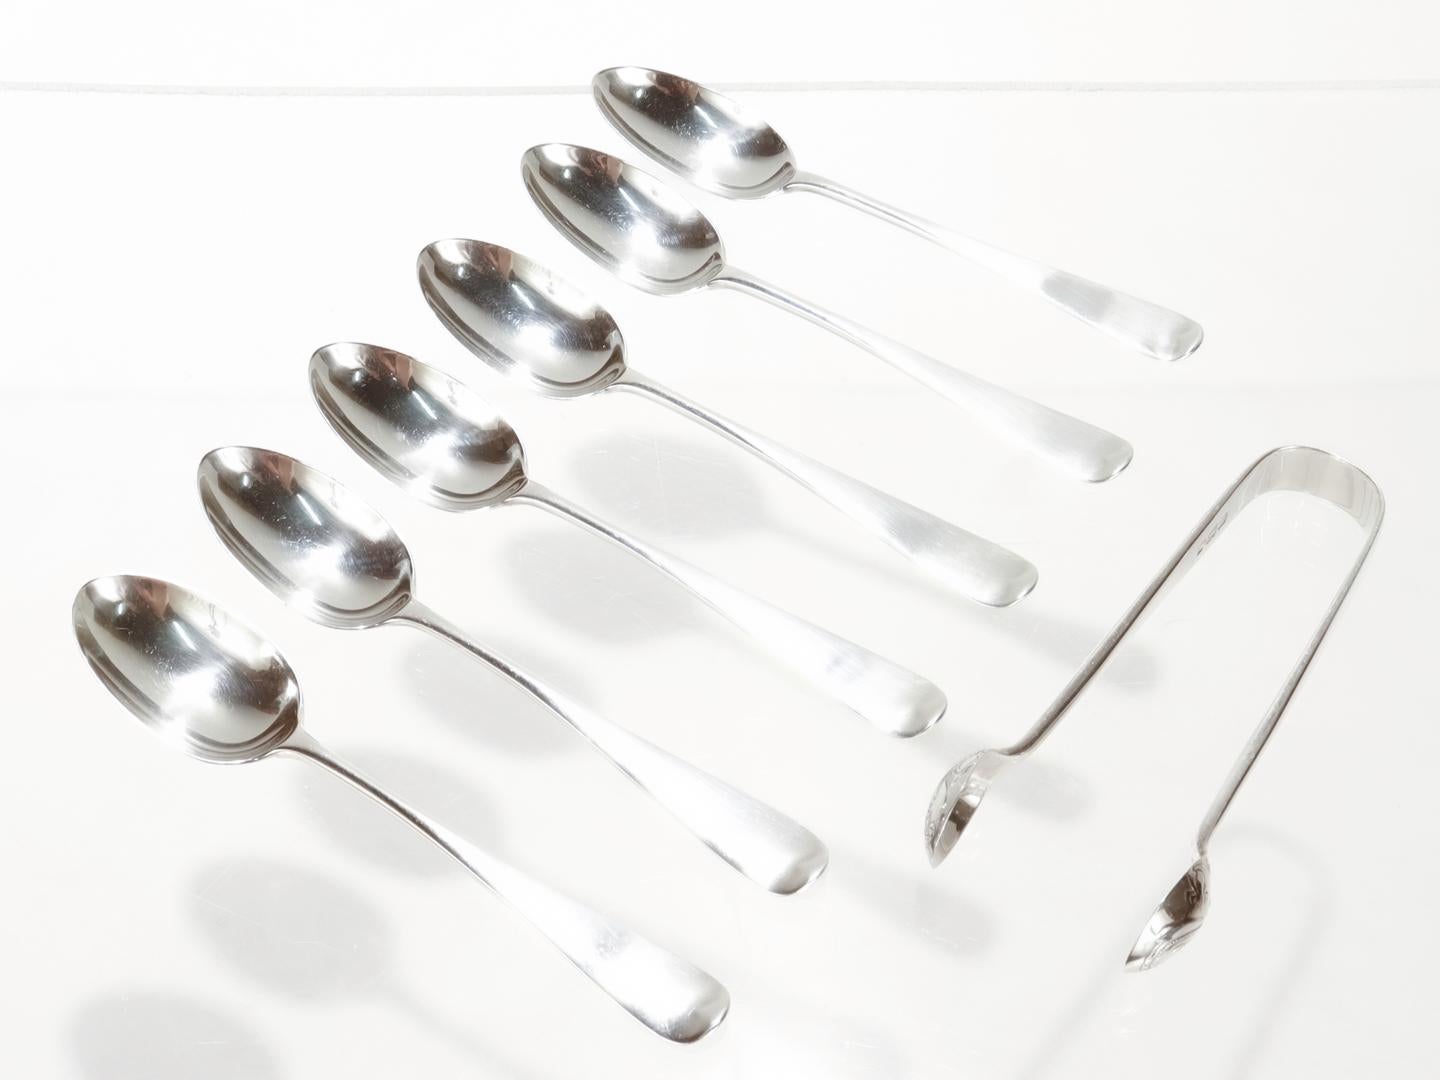 A fine set of 6 demitasse spoons & sugar nips.

In sterling silver. 

In the George II style.

Made by the English silversmiths George Maudsley Jackson and David Landsborough Fullerton of London.

Retailed by Edmund Heppell Mason of Middlesbrough,